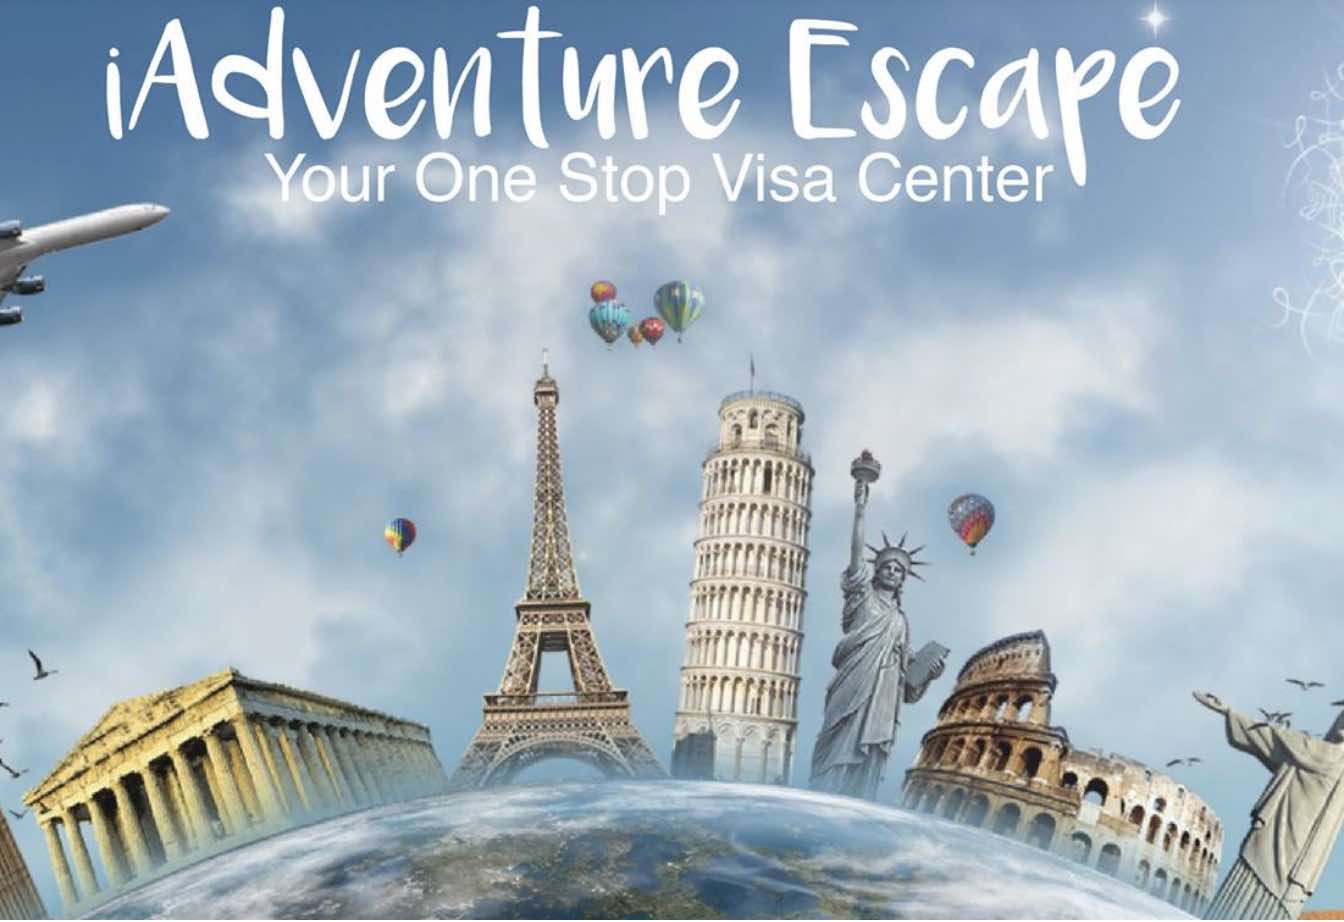 iadventure escape tours and travel sdn. bhd